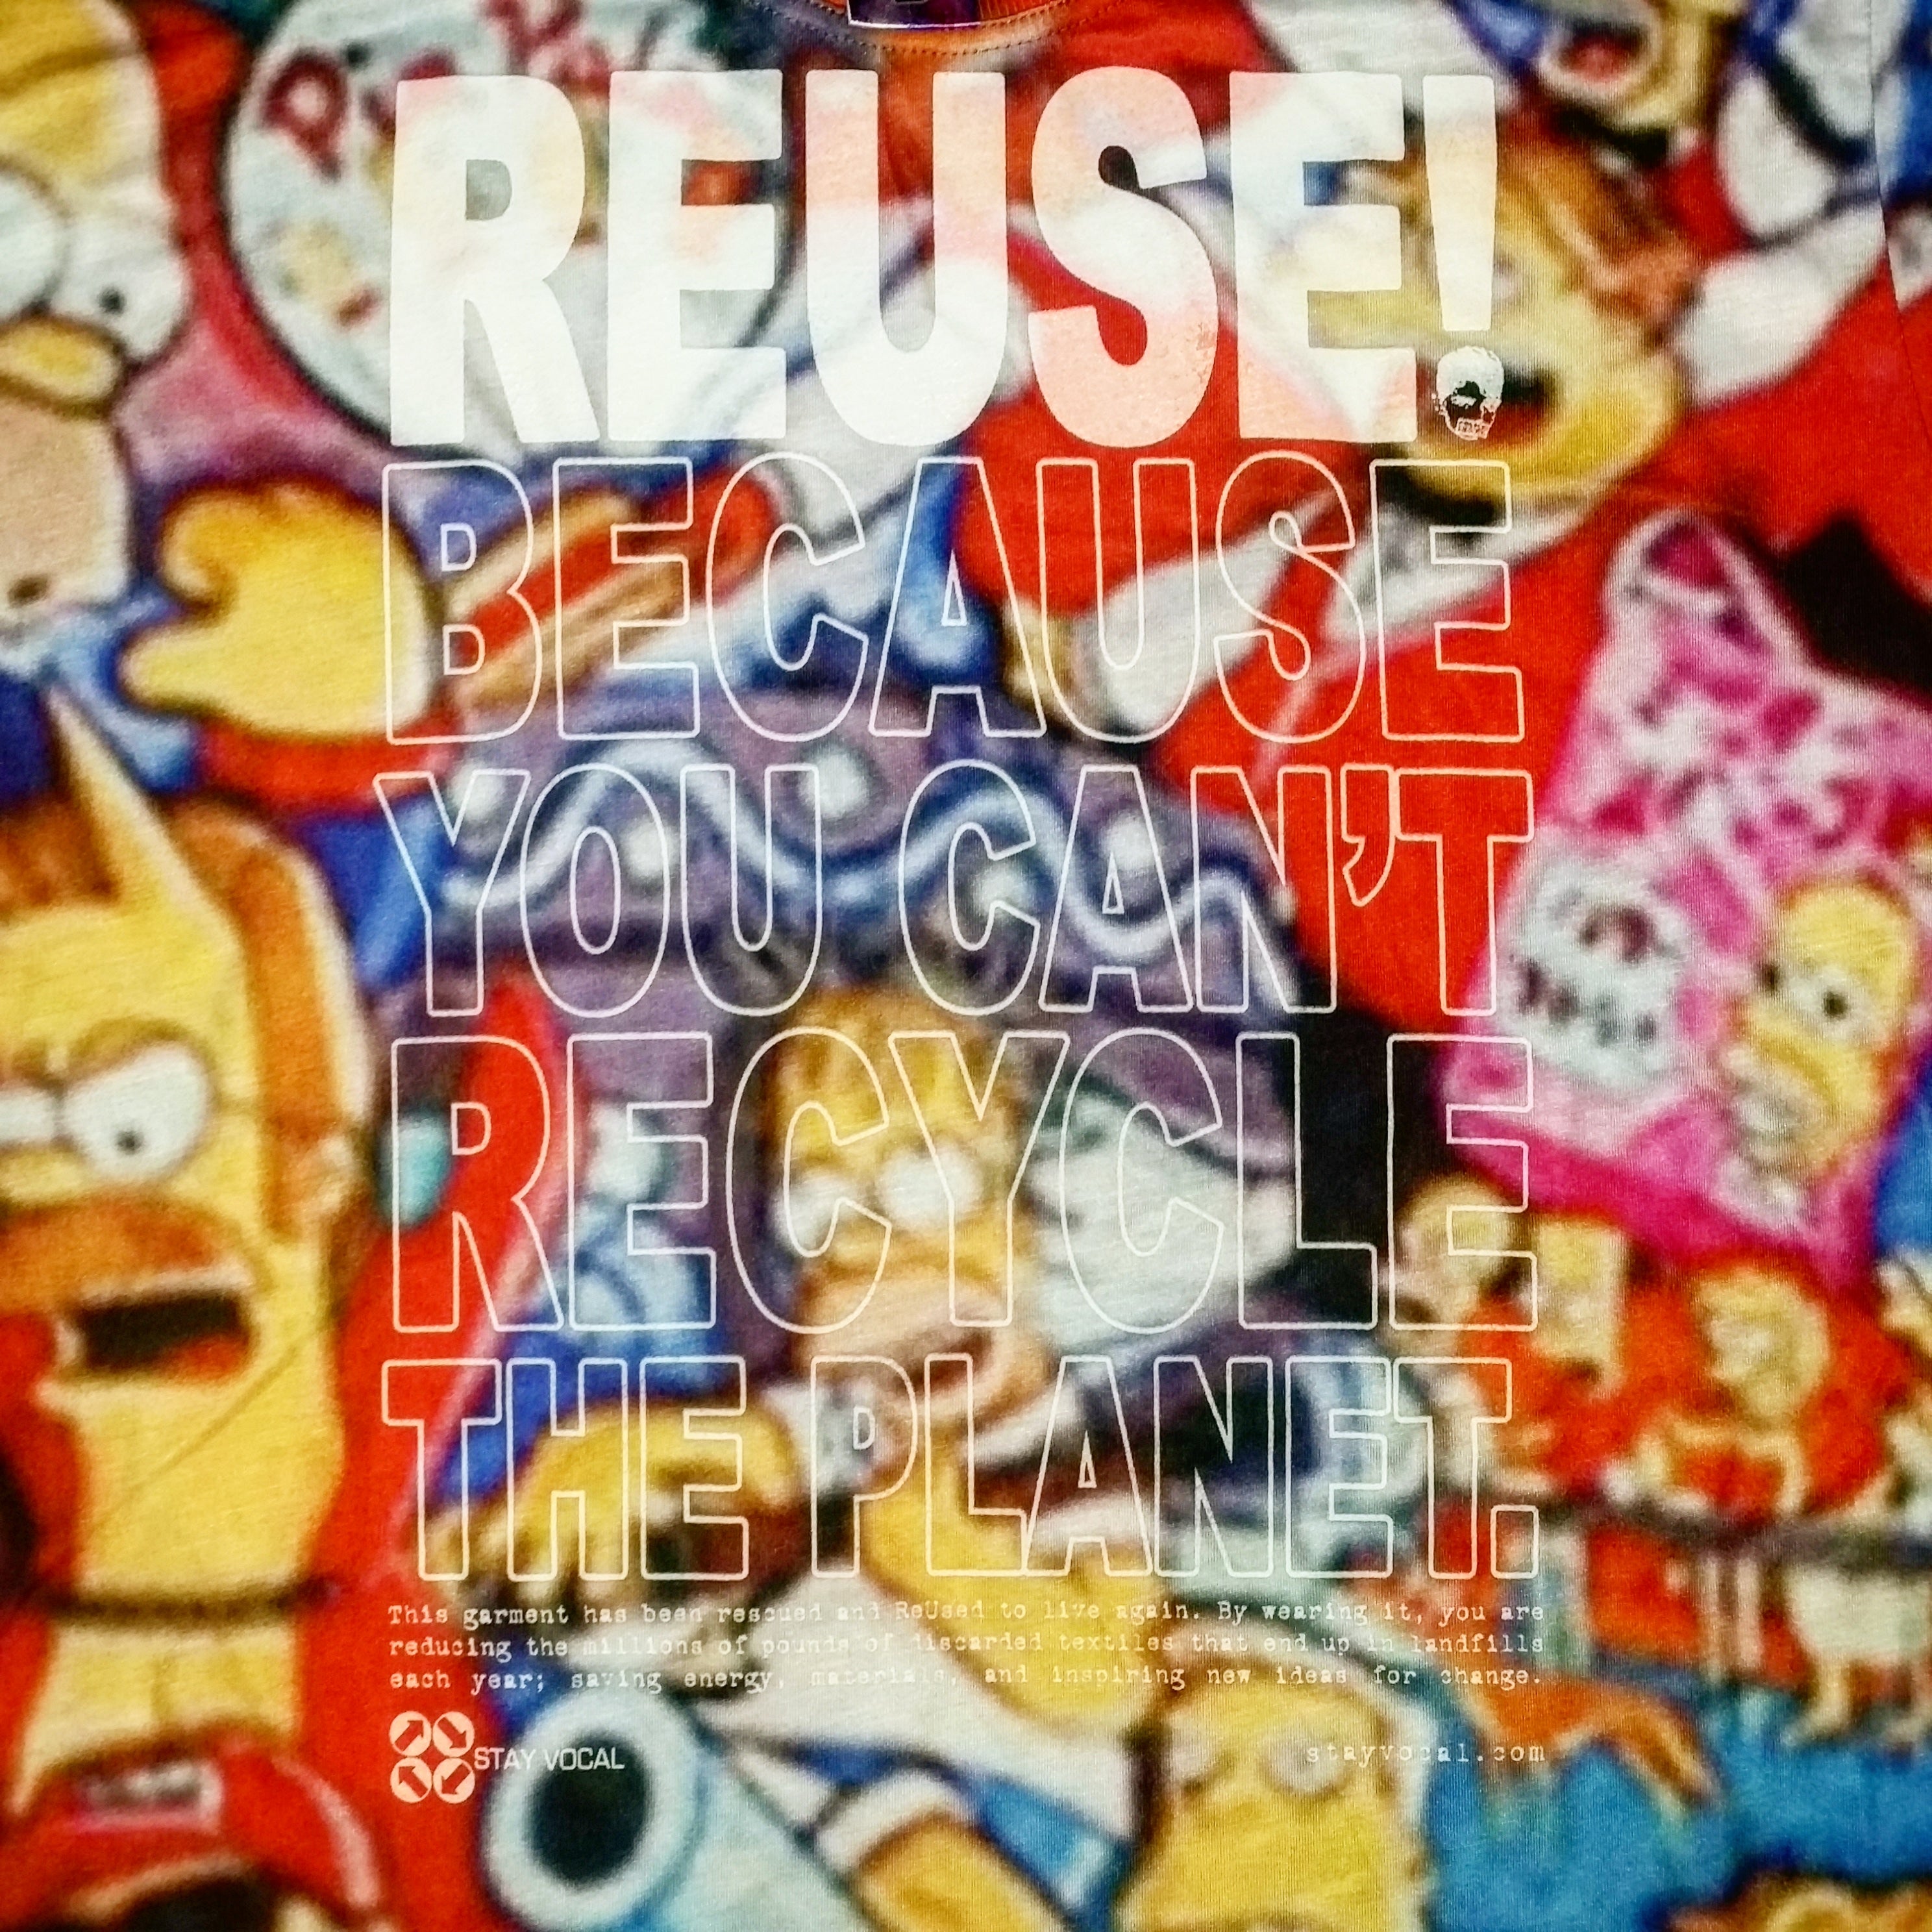 One of a Kind (Men's M) REUSE! The Simpsons Citizens All Over T-Shirt